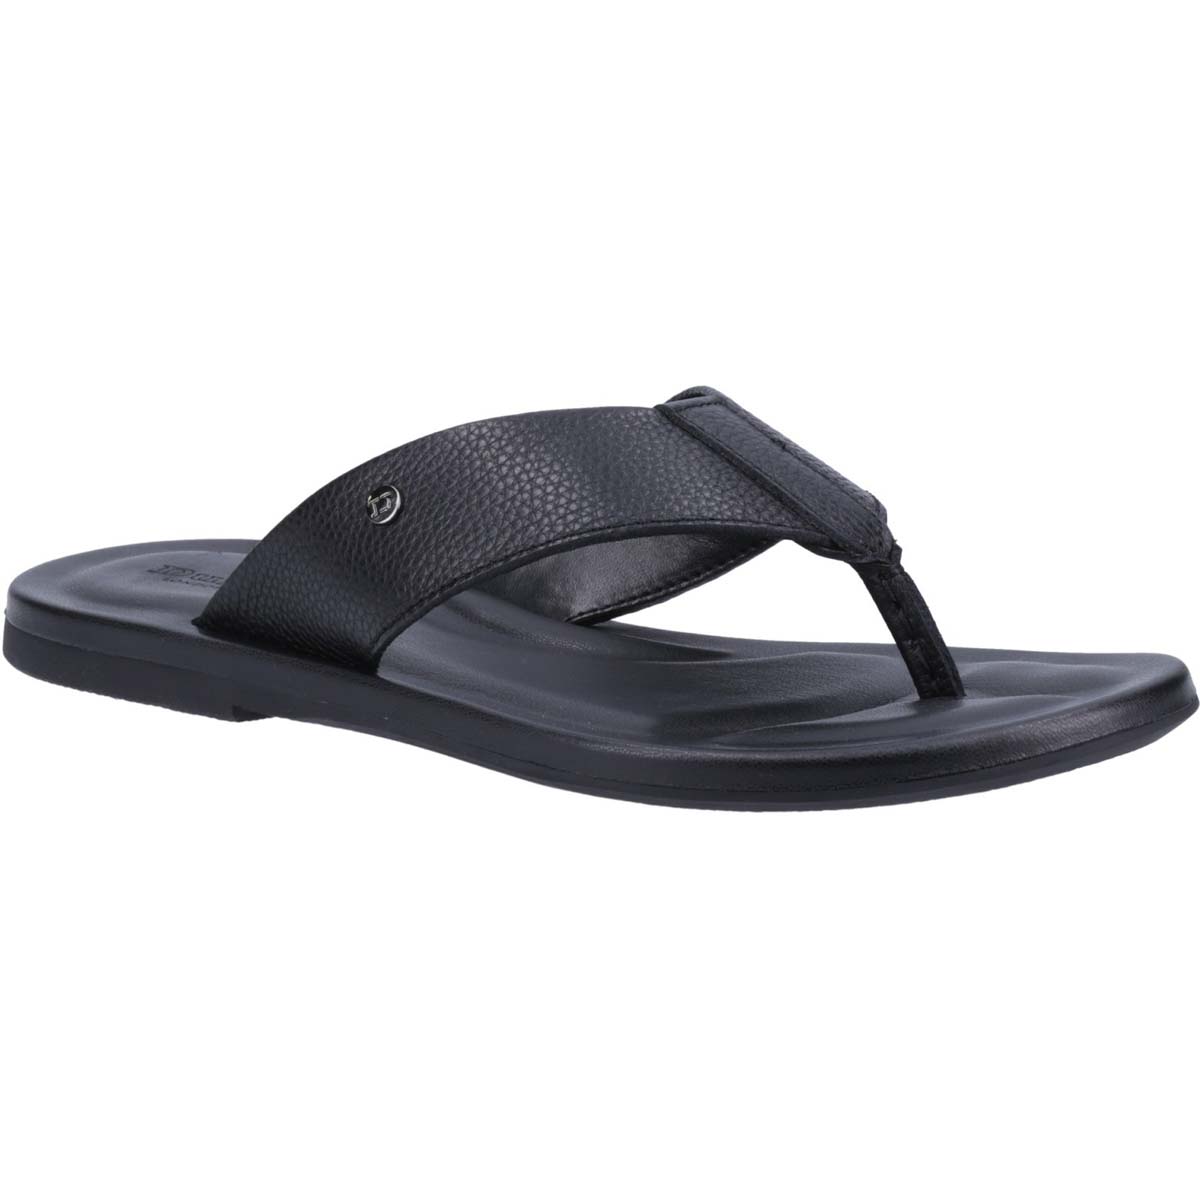 Dune London Freds Black Mens sandals 1426510820003 in a Plain Leather in Size 11